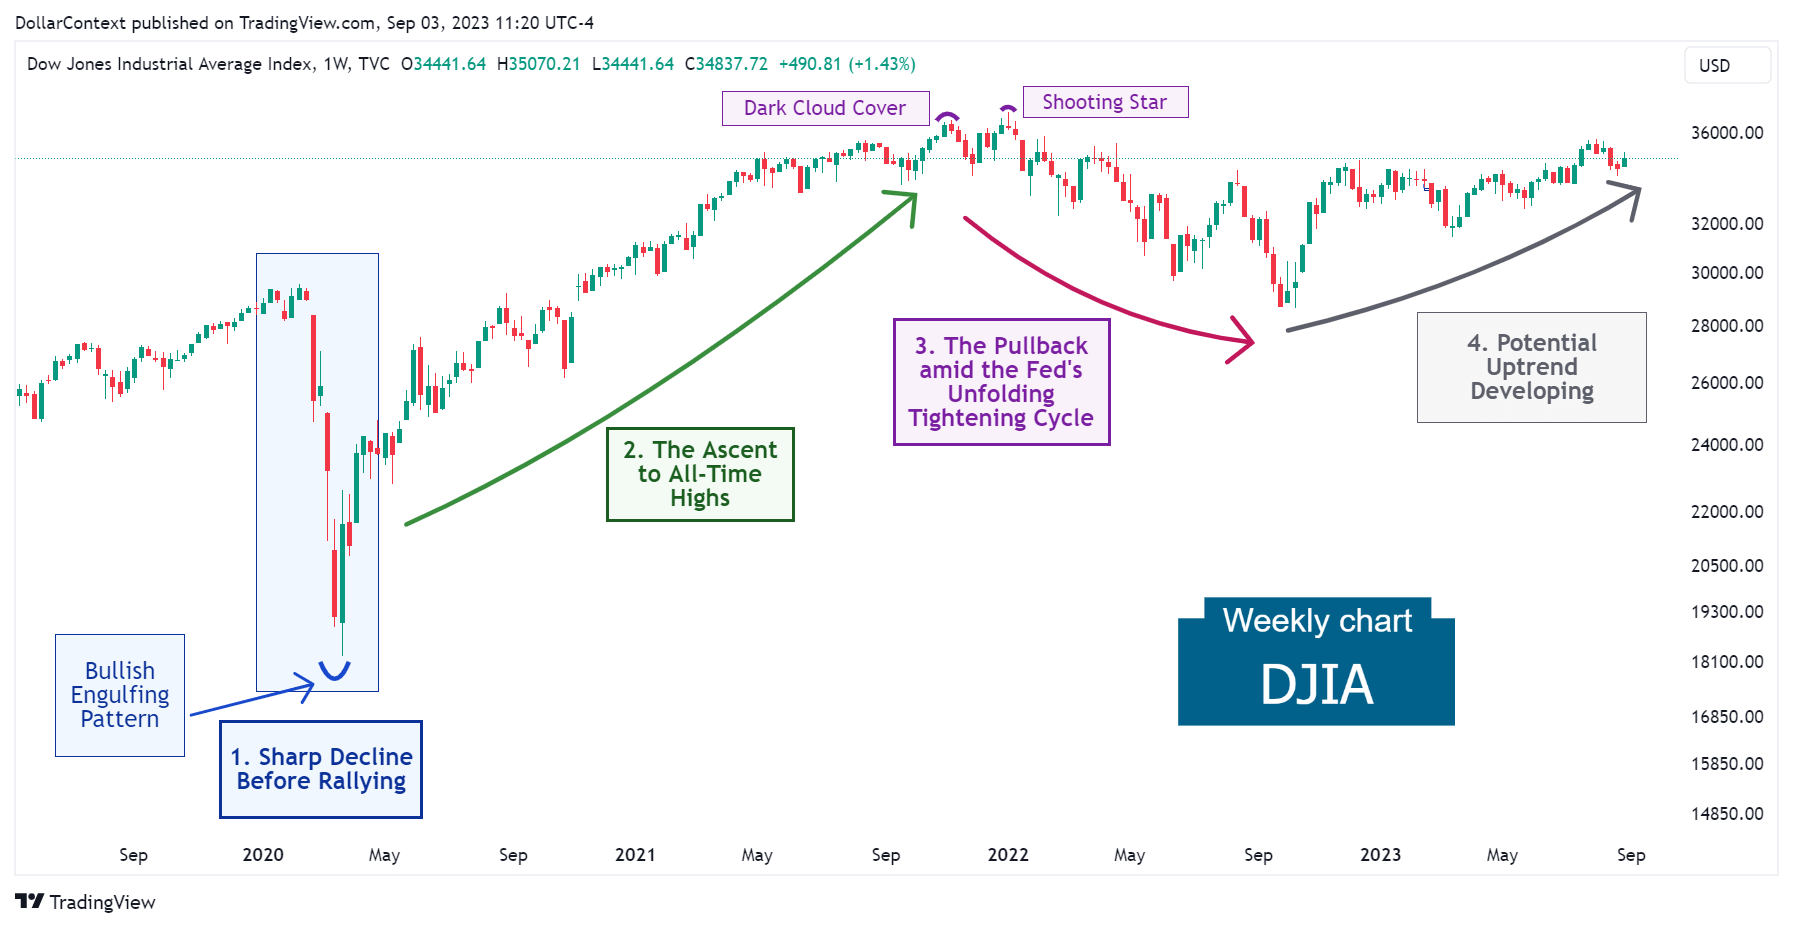 DJIA: Potential Uptrend Developing Since October 2022 (Weekly Chart)